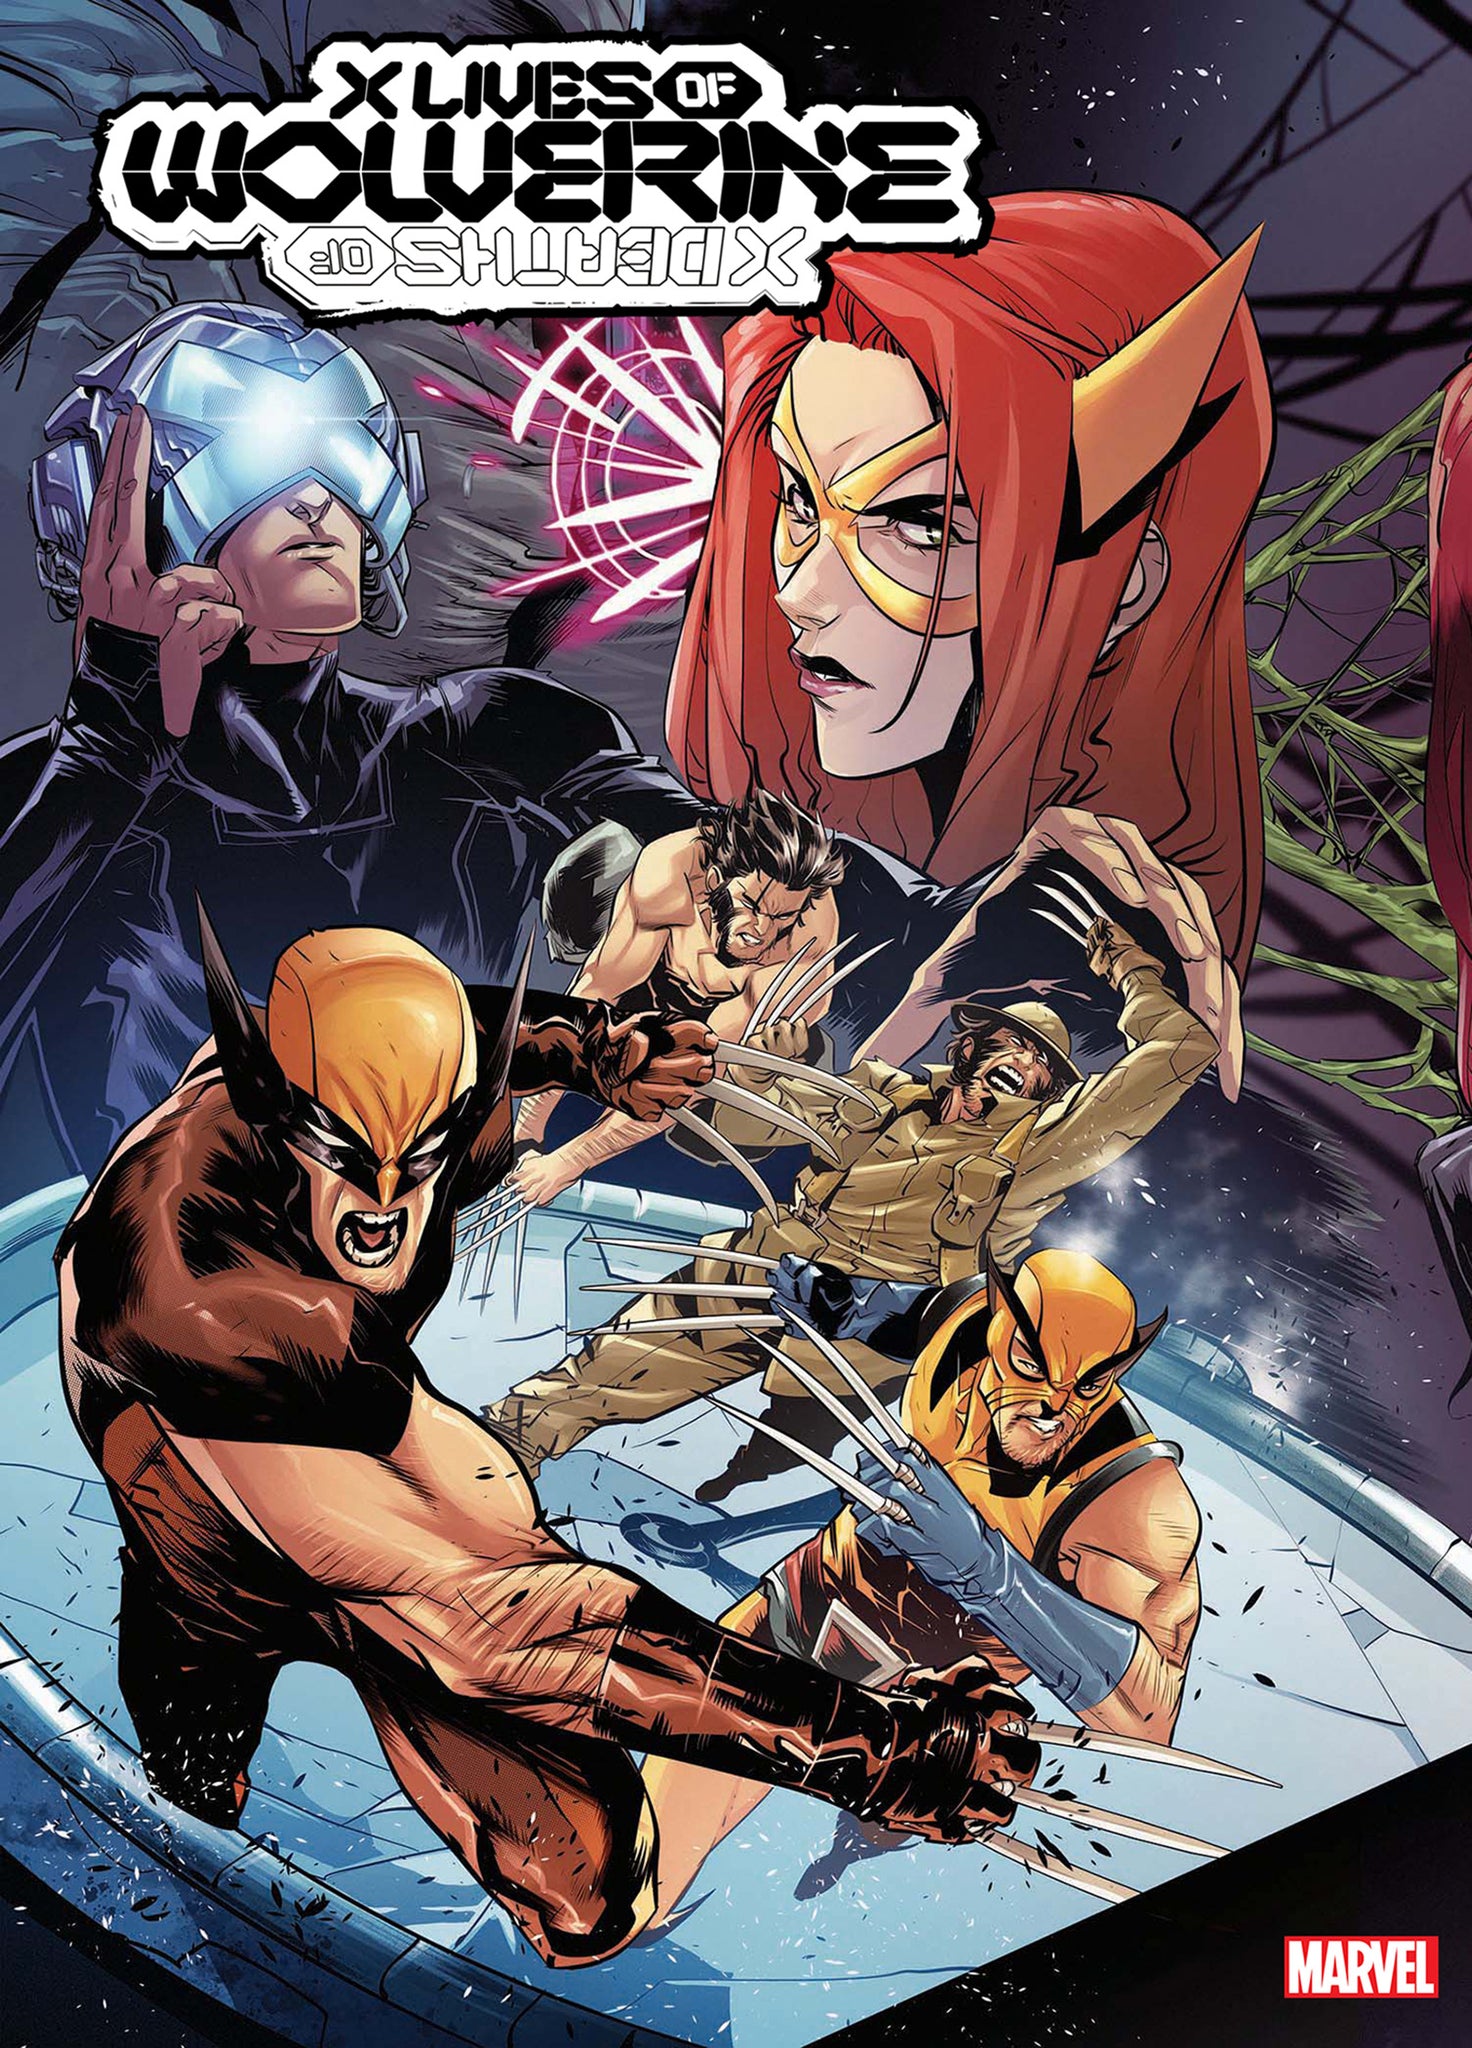 X LIVES OF WOLVERINE 1 VICENTINI 2nd Printing Variant